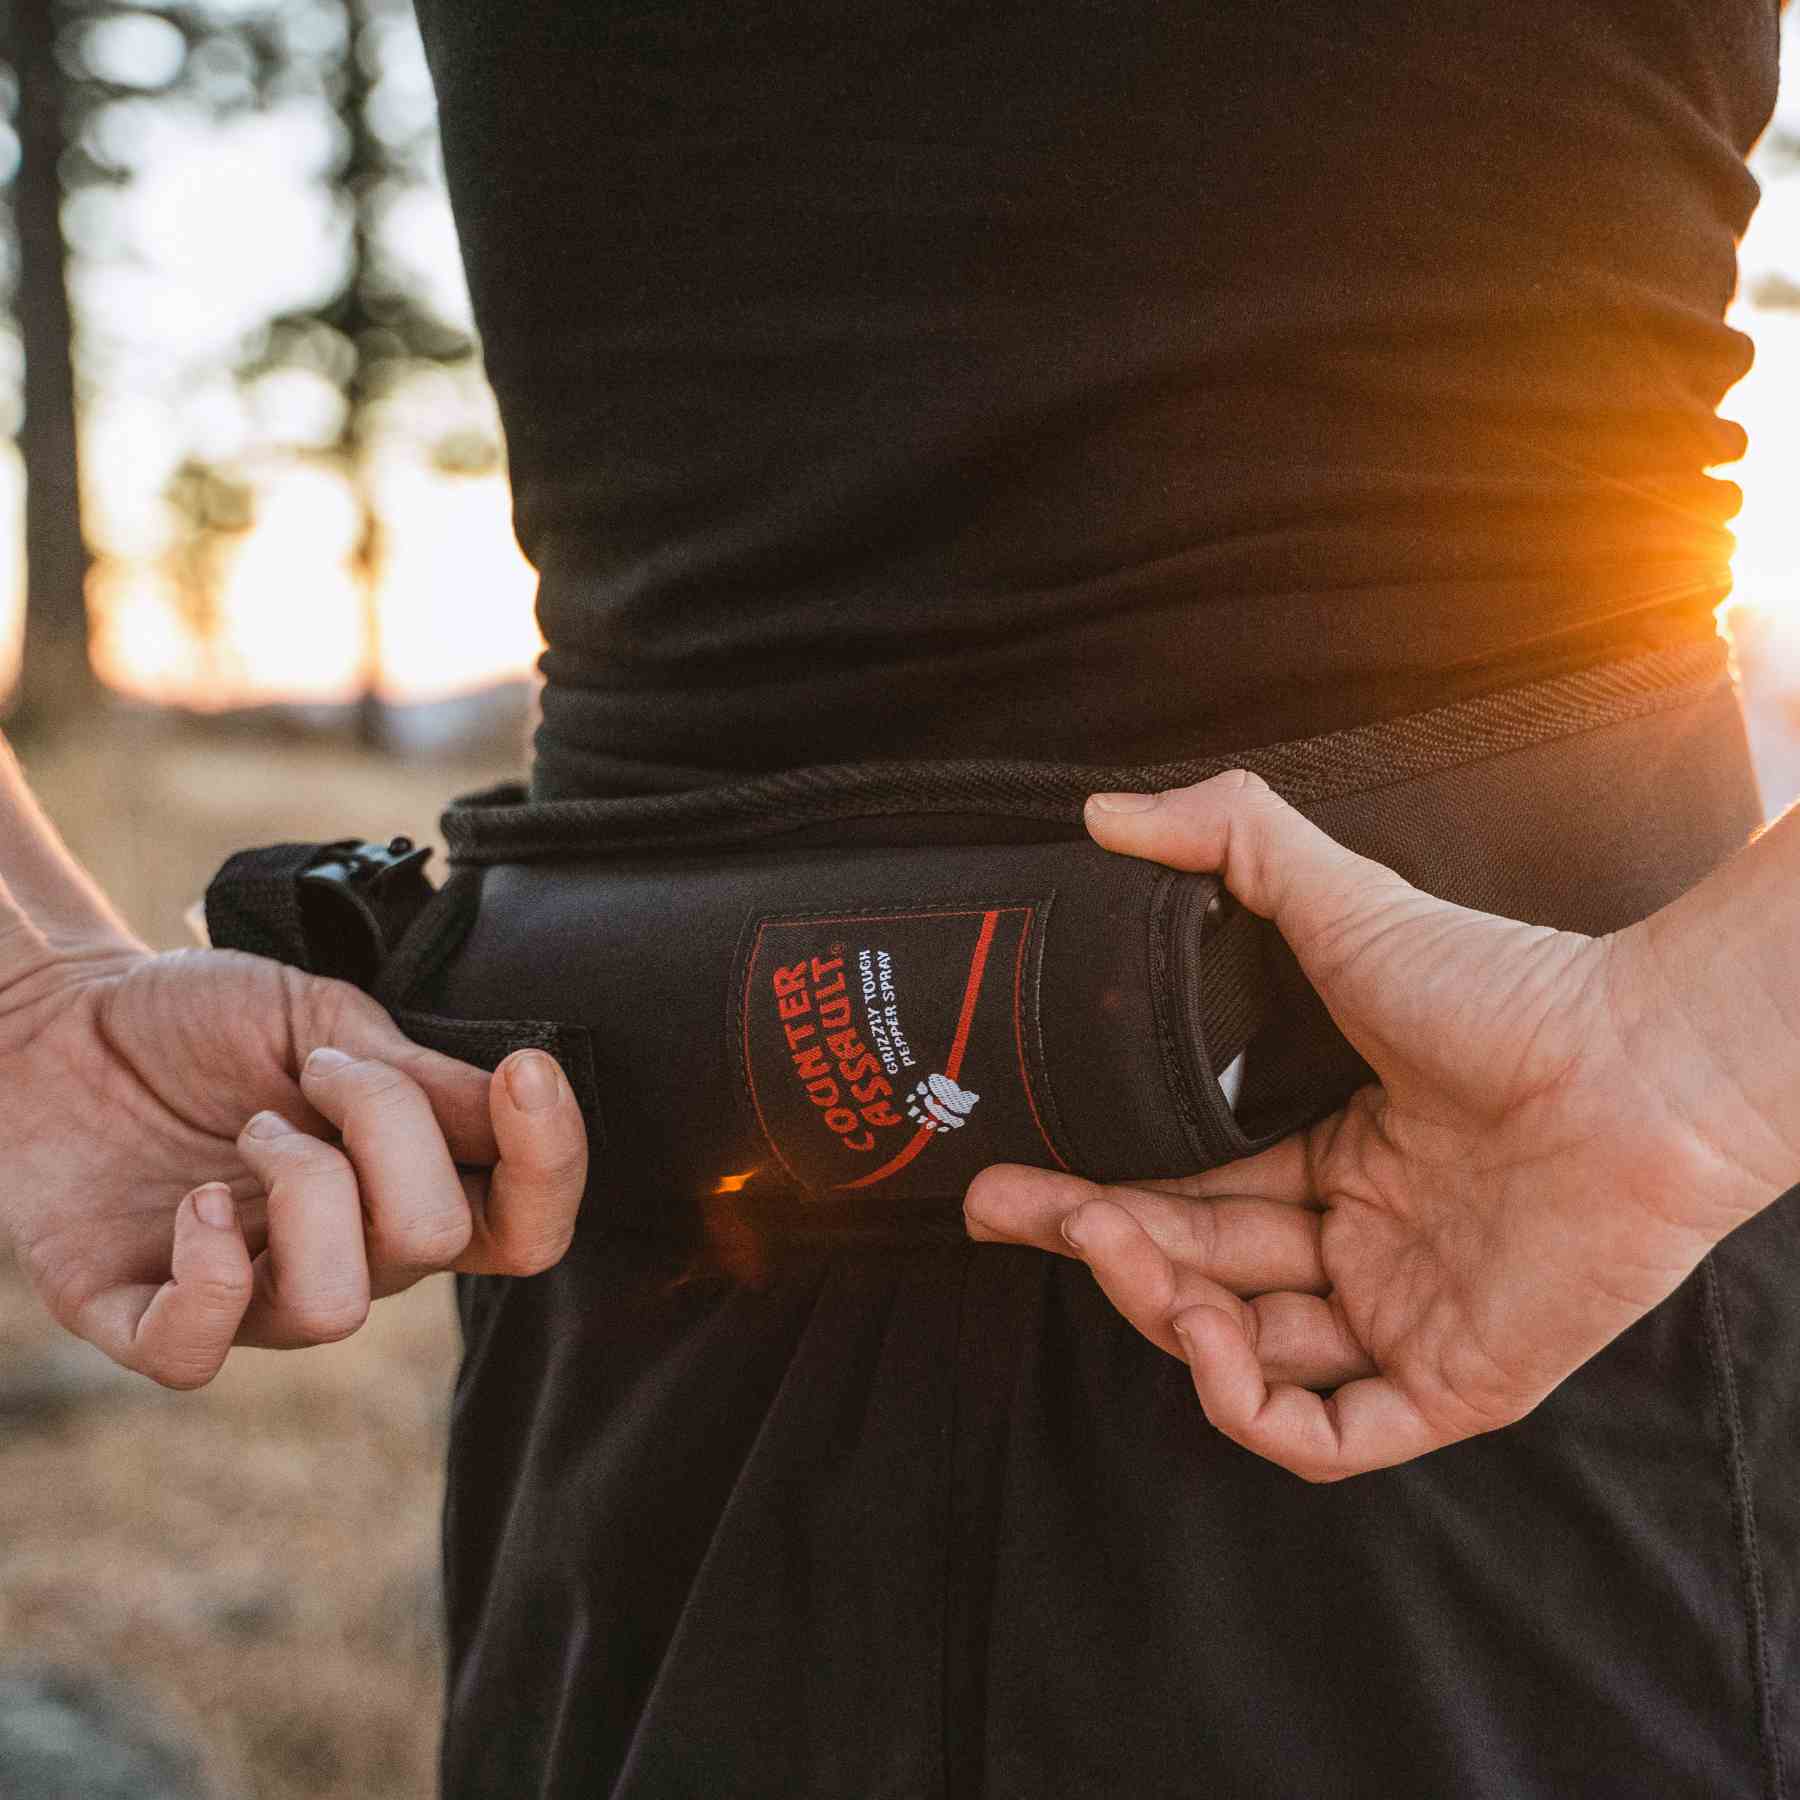 Woman adjusting the trail runner holster